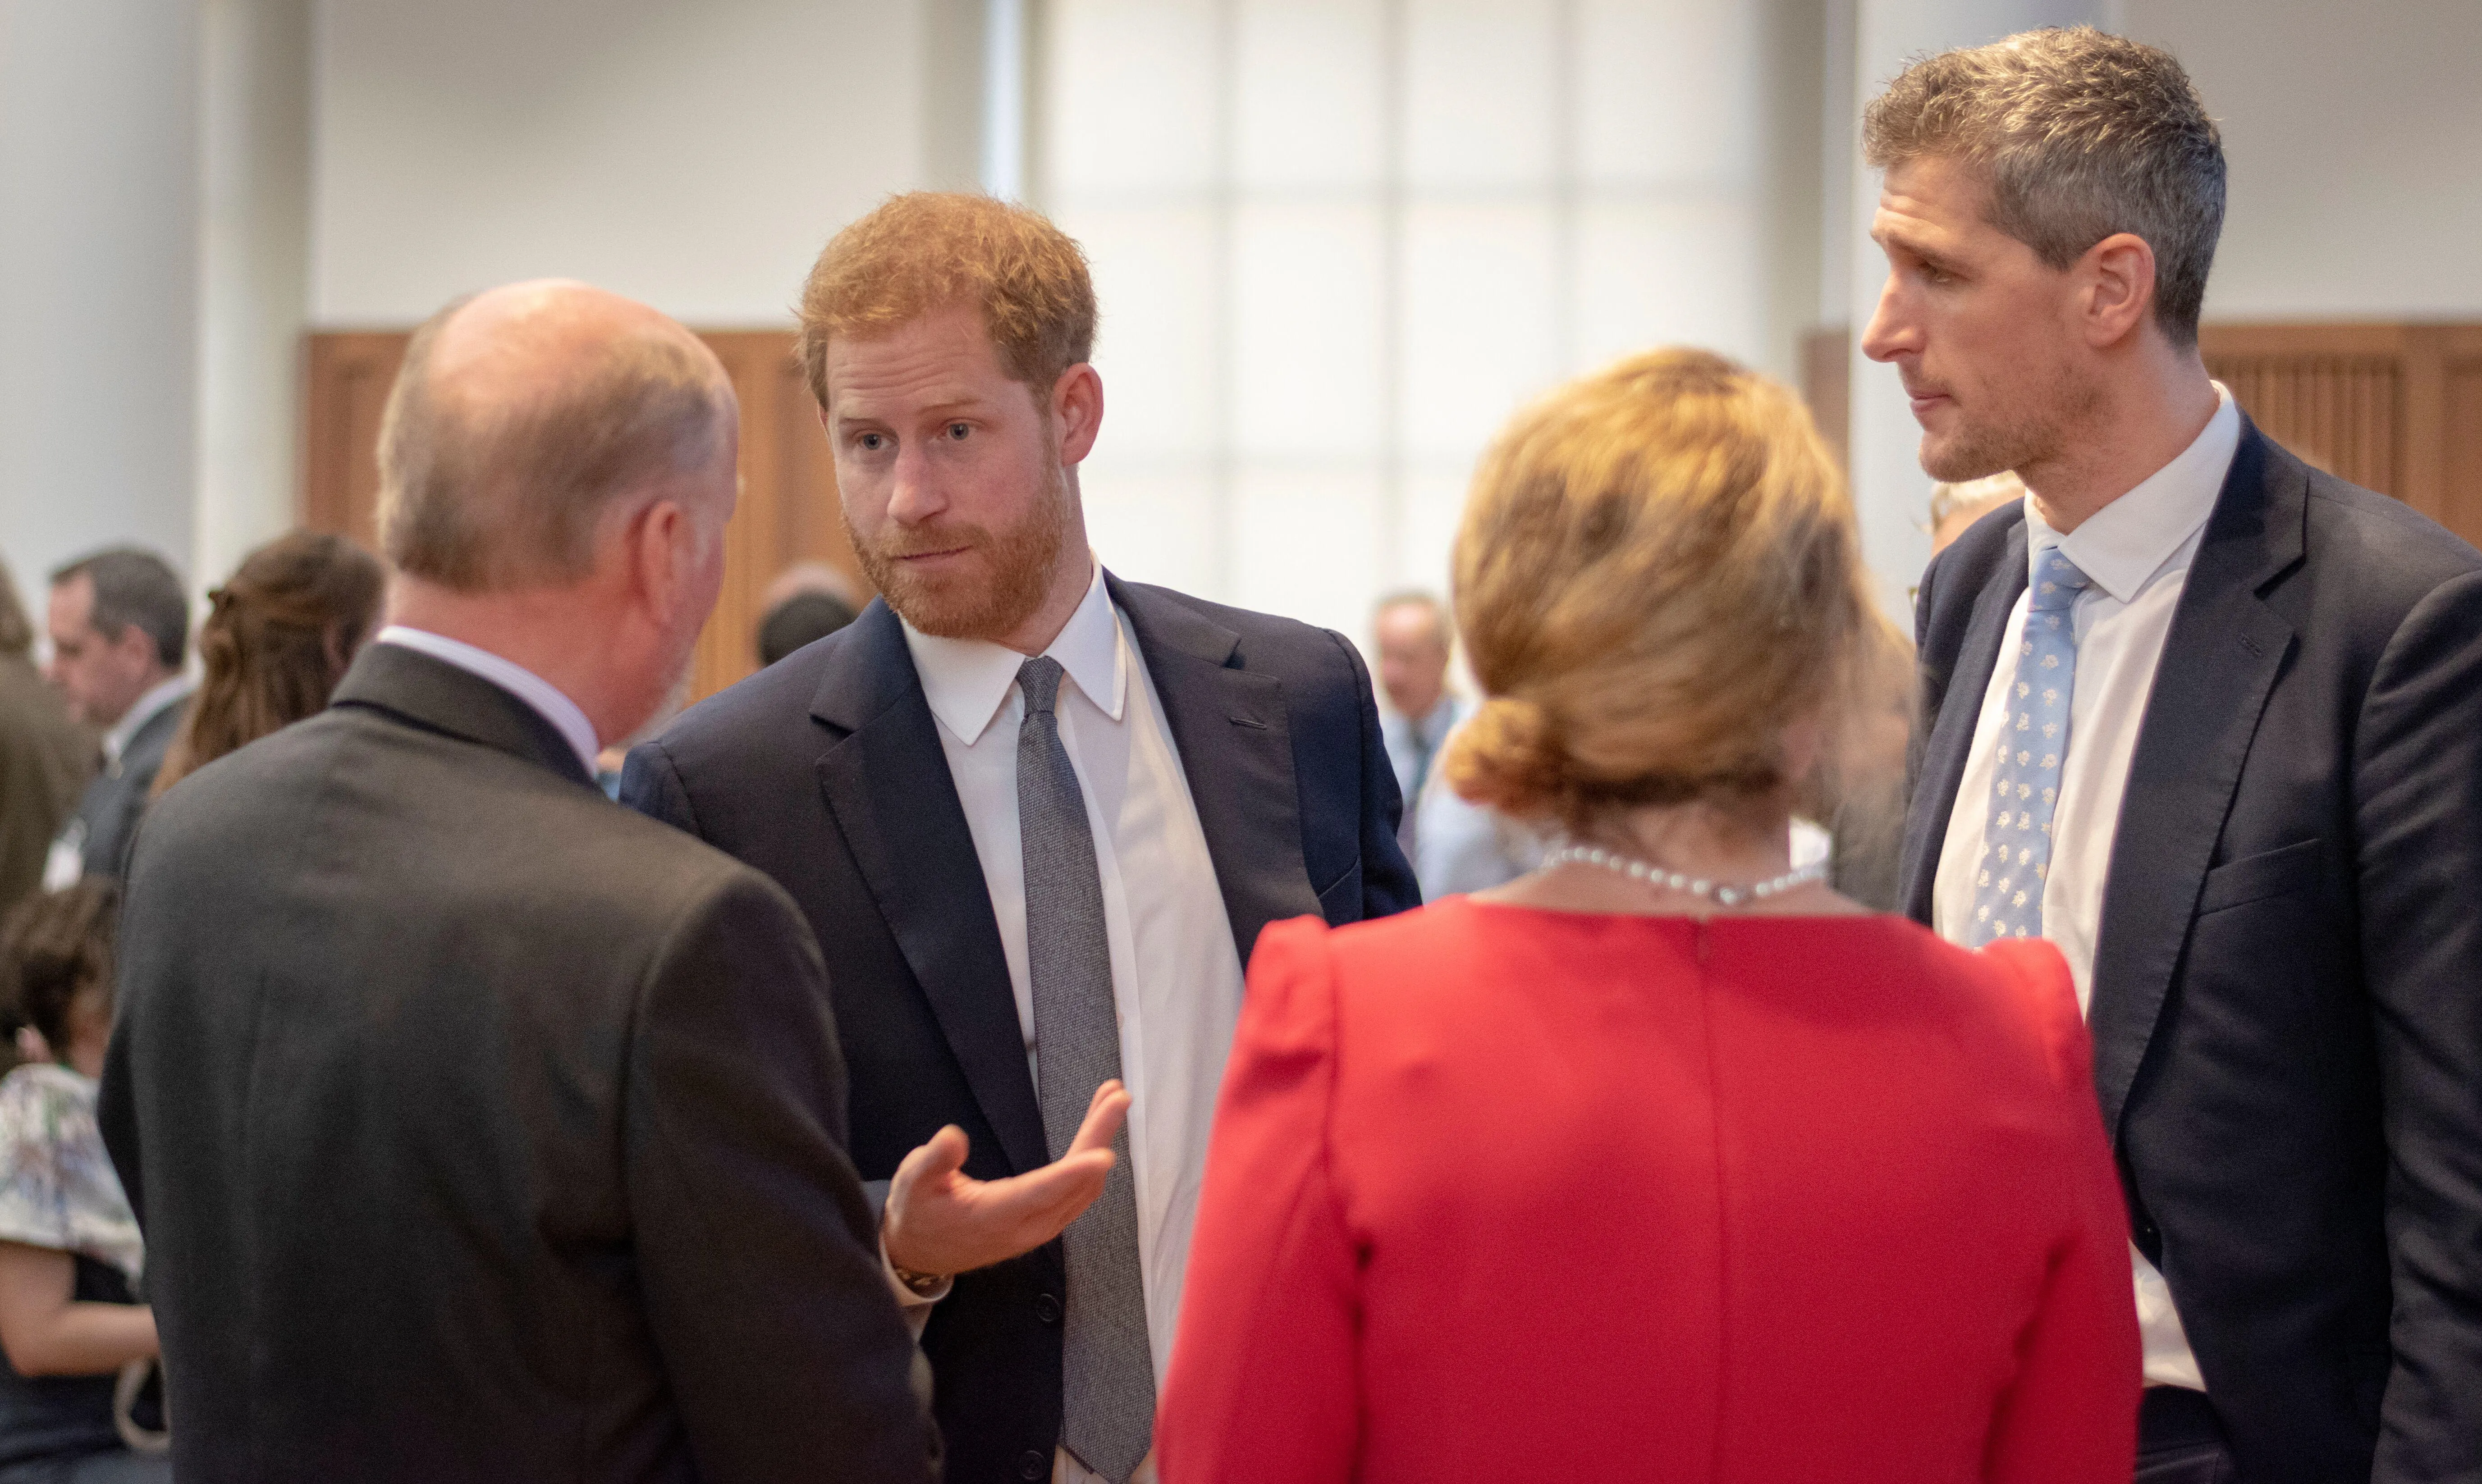 The Duke of Sussex VMHC2019